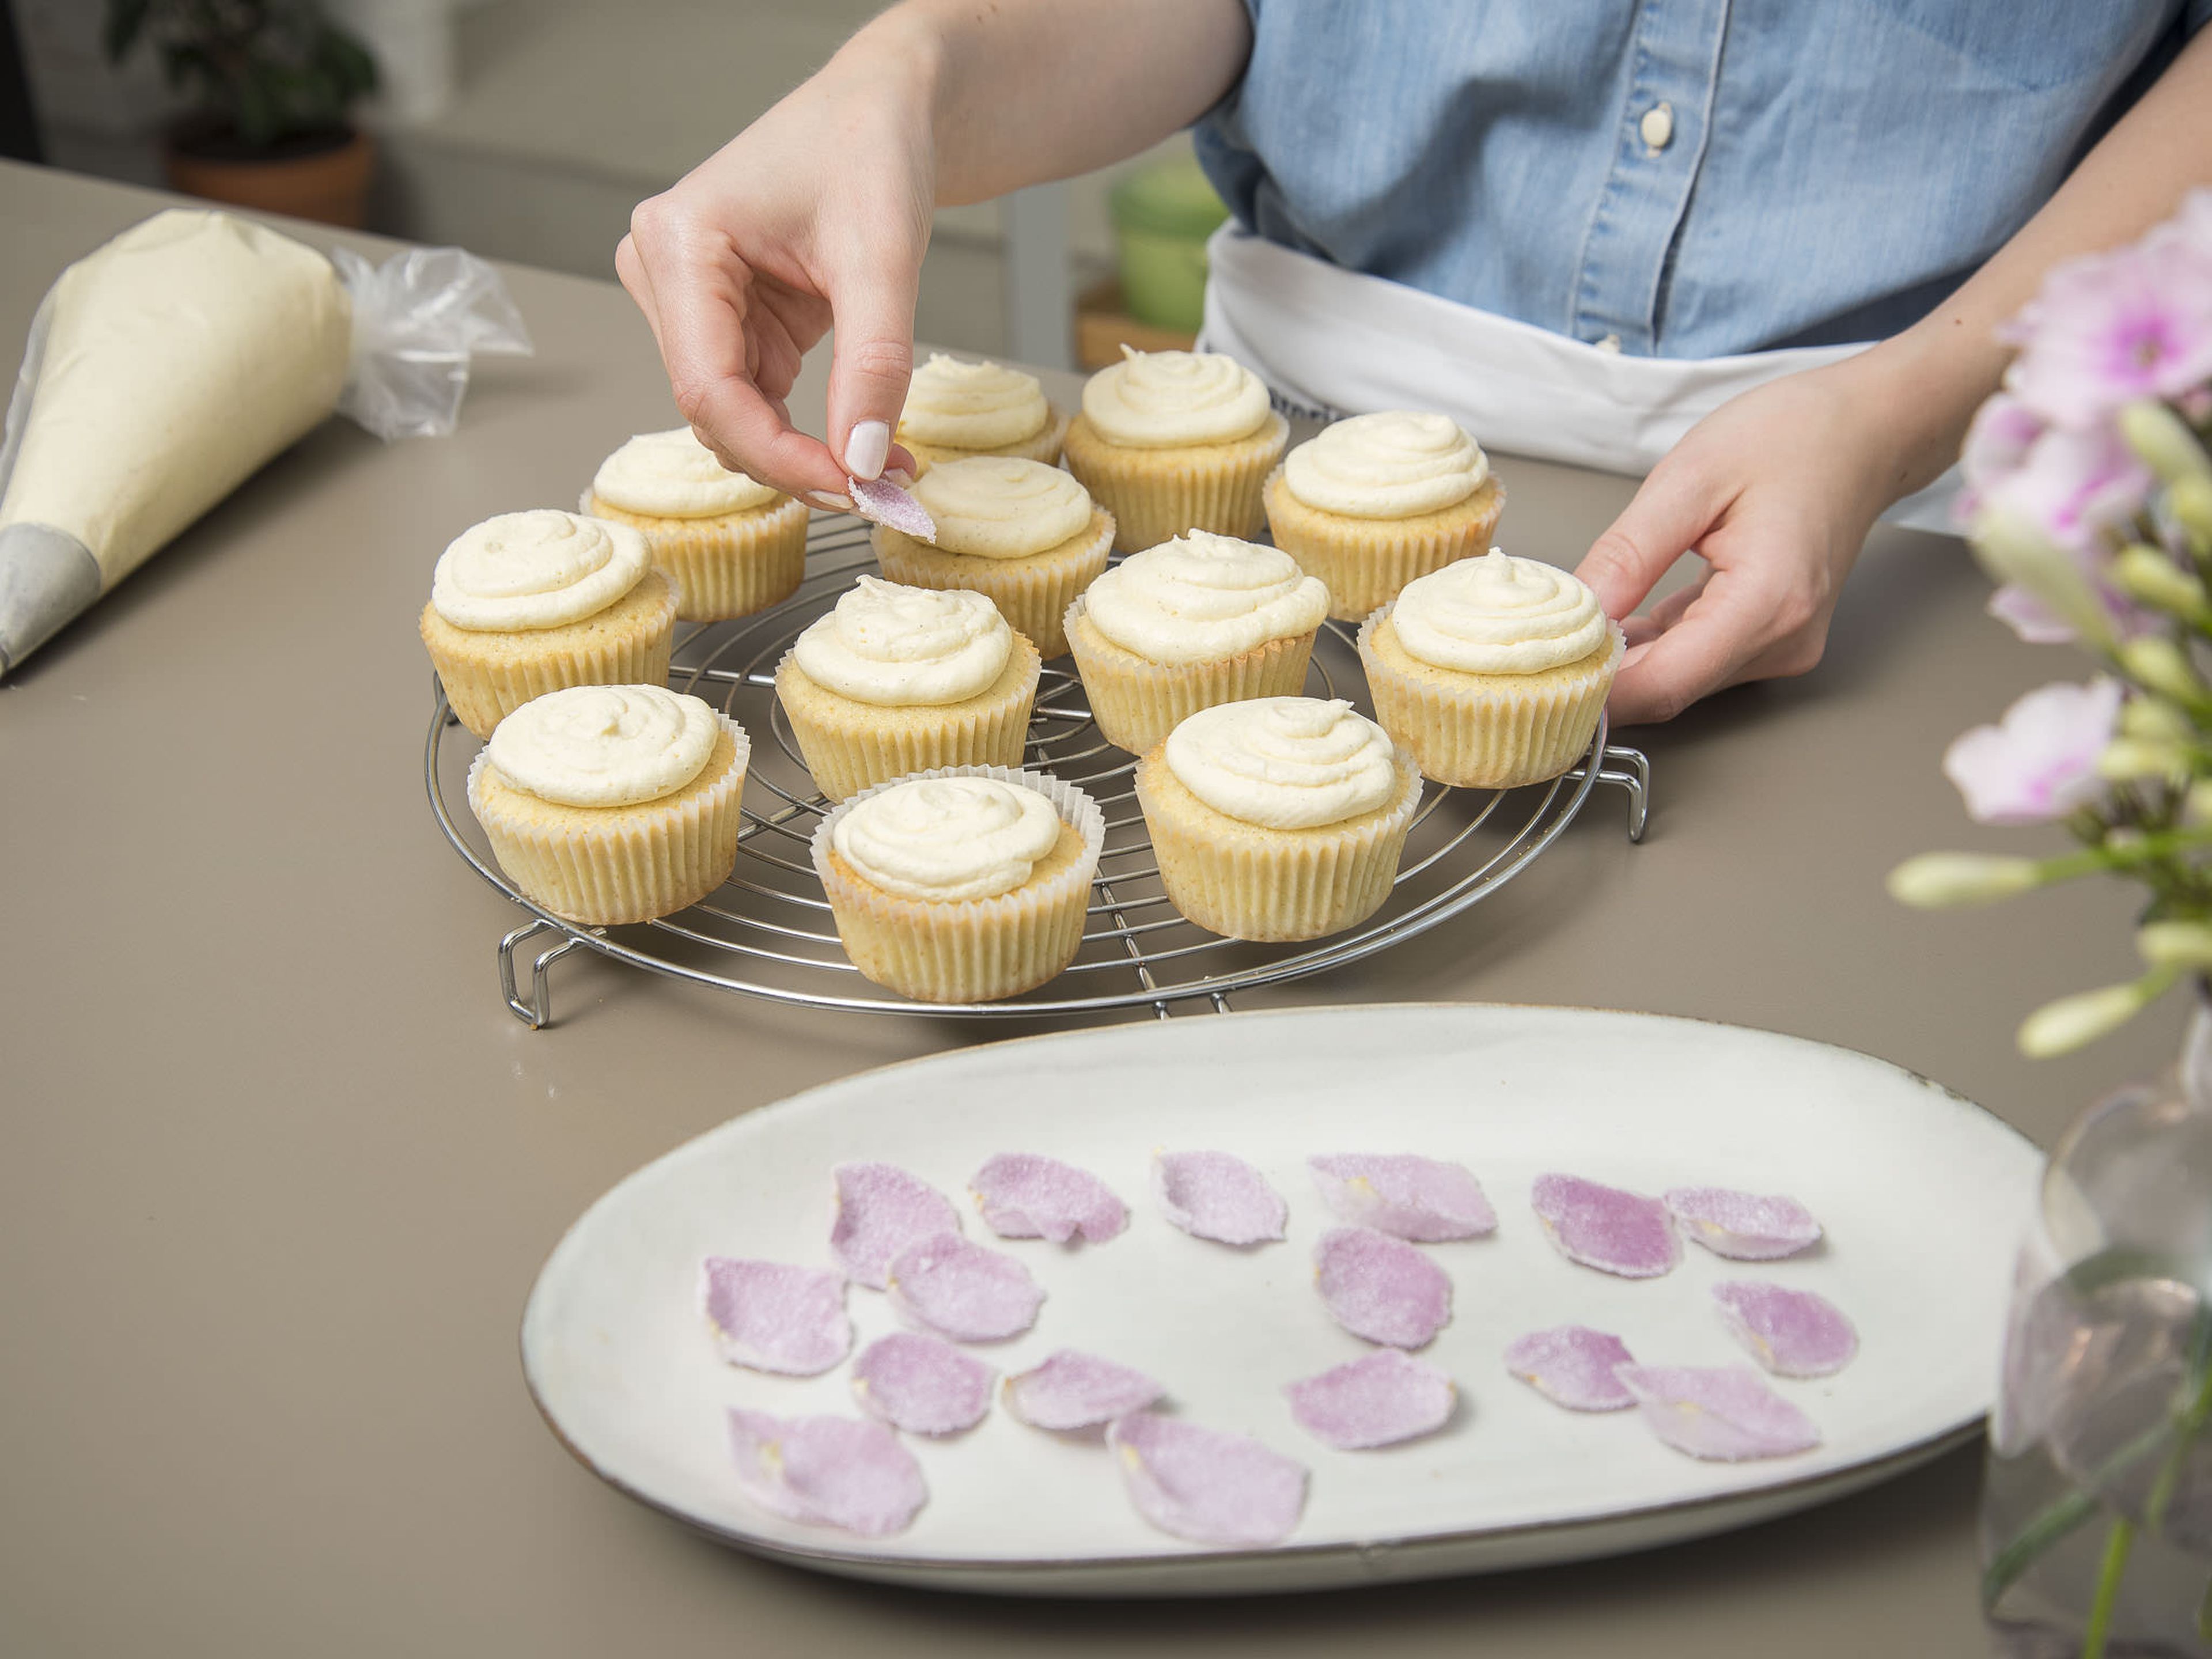 Frost the cupcakes by working your way from inside out, drawing upwards in circles. Decorate each cupcake with a sugarcoated rose petal. Enjoy!